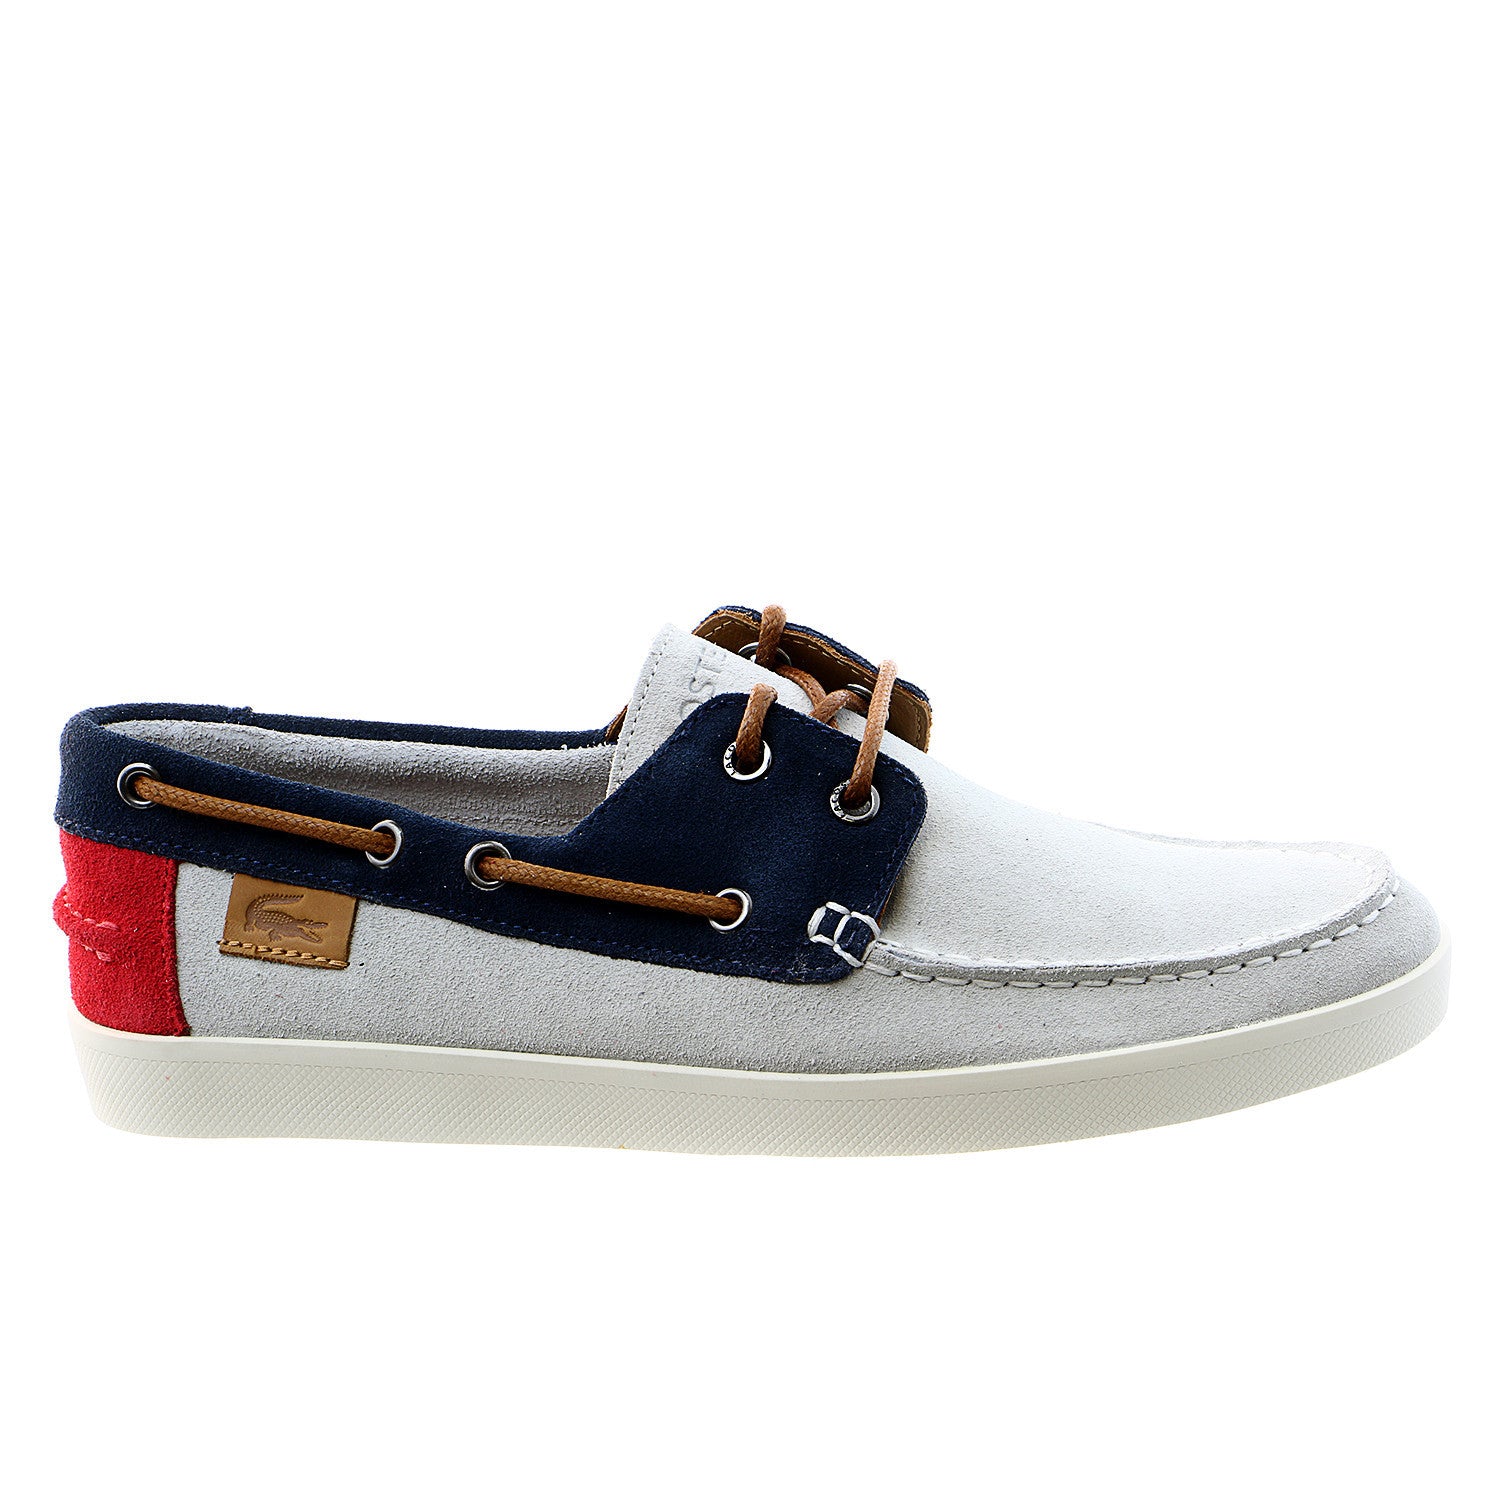 Lacoste Boat Hd | lupon.gov.ph